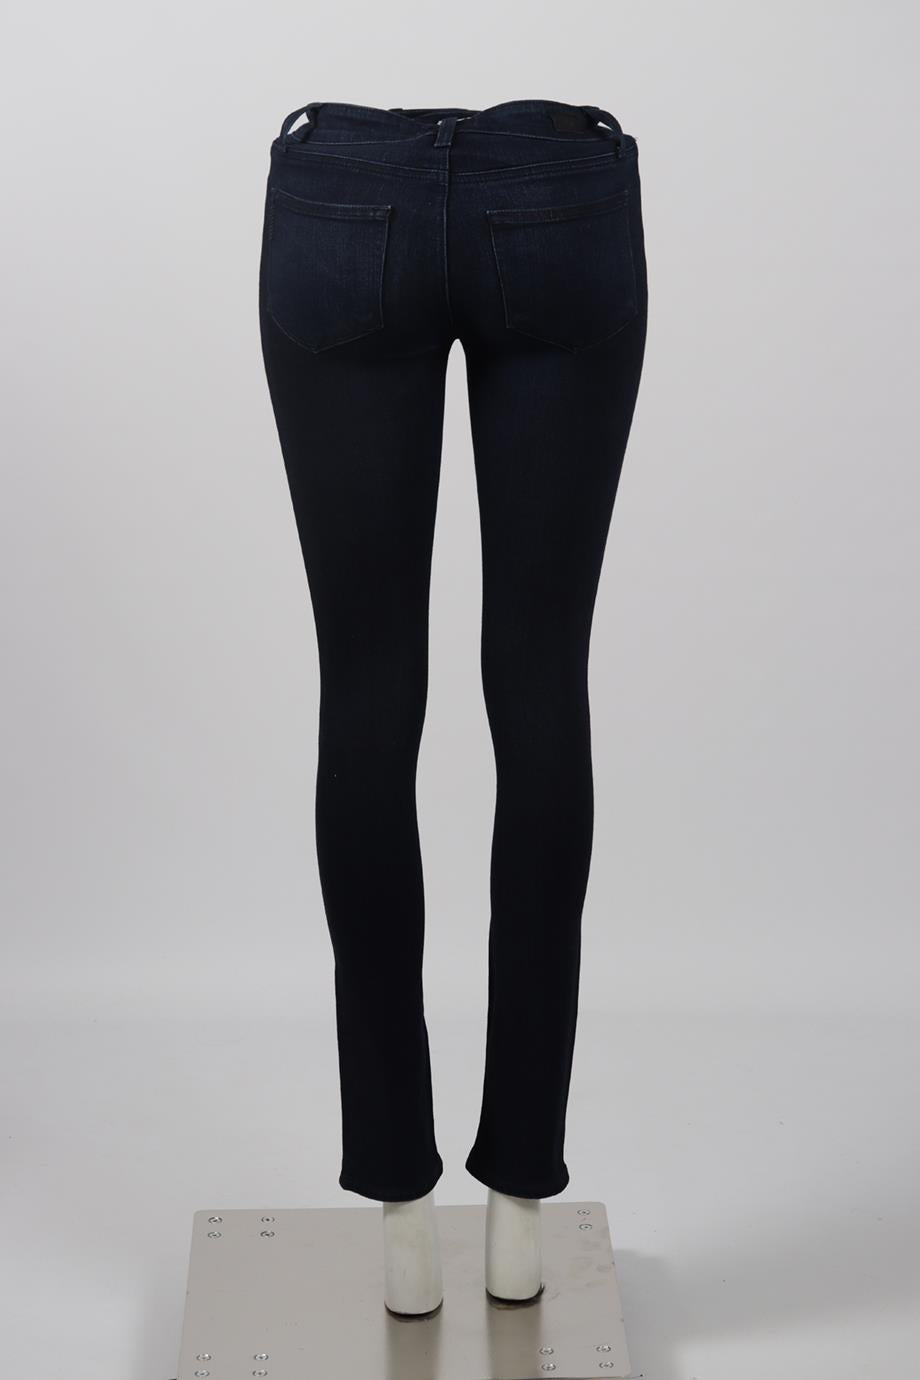 PAIGE HIGH RISE SKINNY JEANS W25 UK 6-8